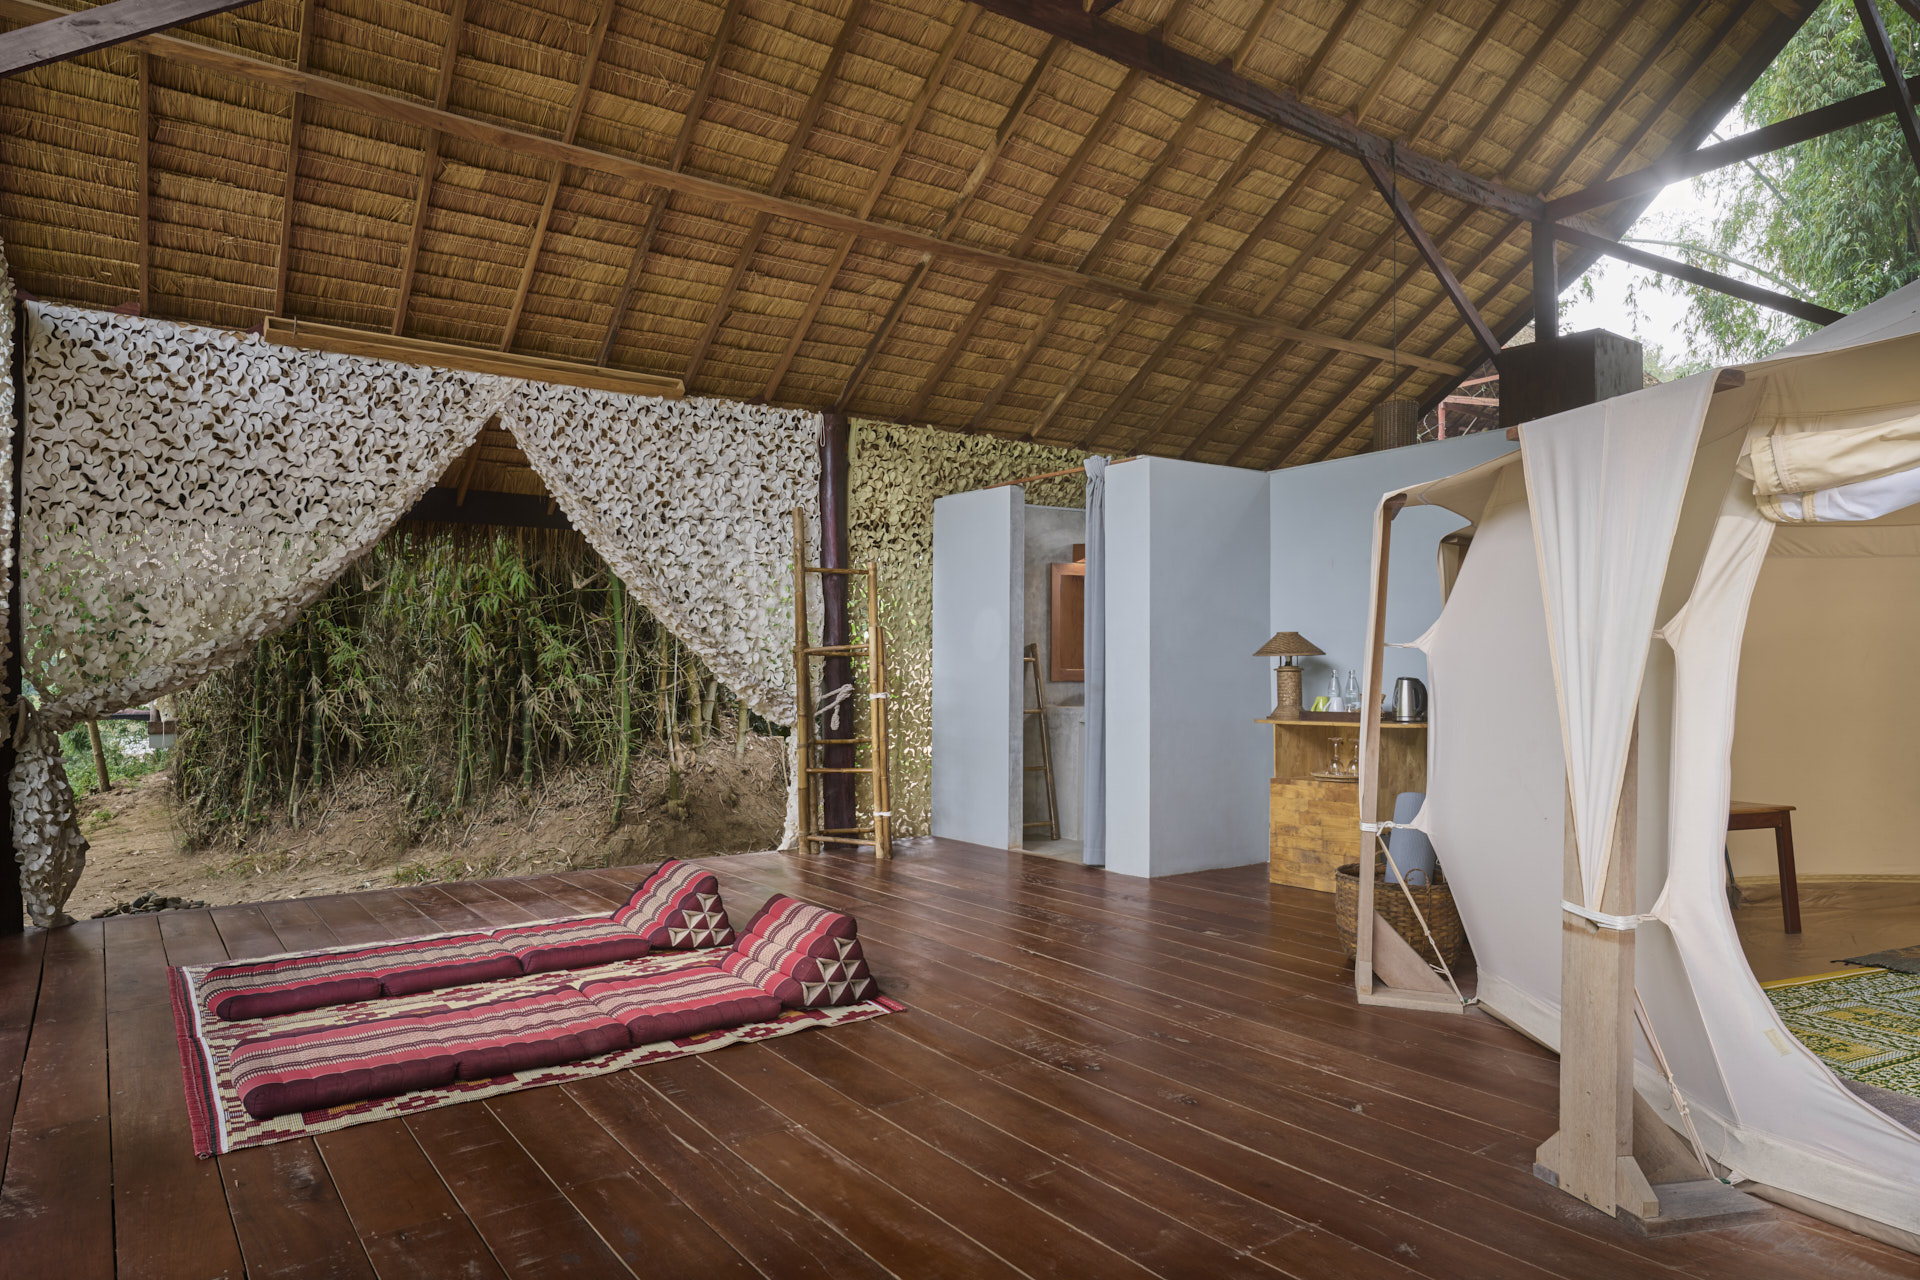 Open-air yoga studio with bamboo roof, wooden floors, red mats, and white drapes in a natural setting near Luang Prabang.